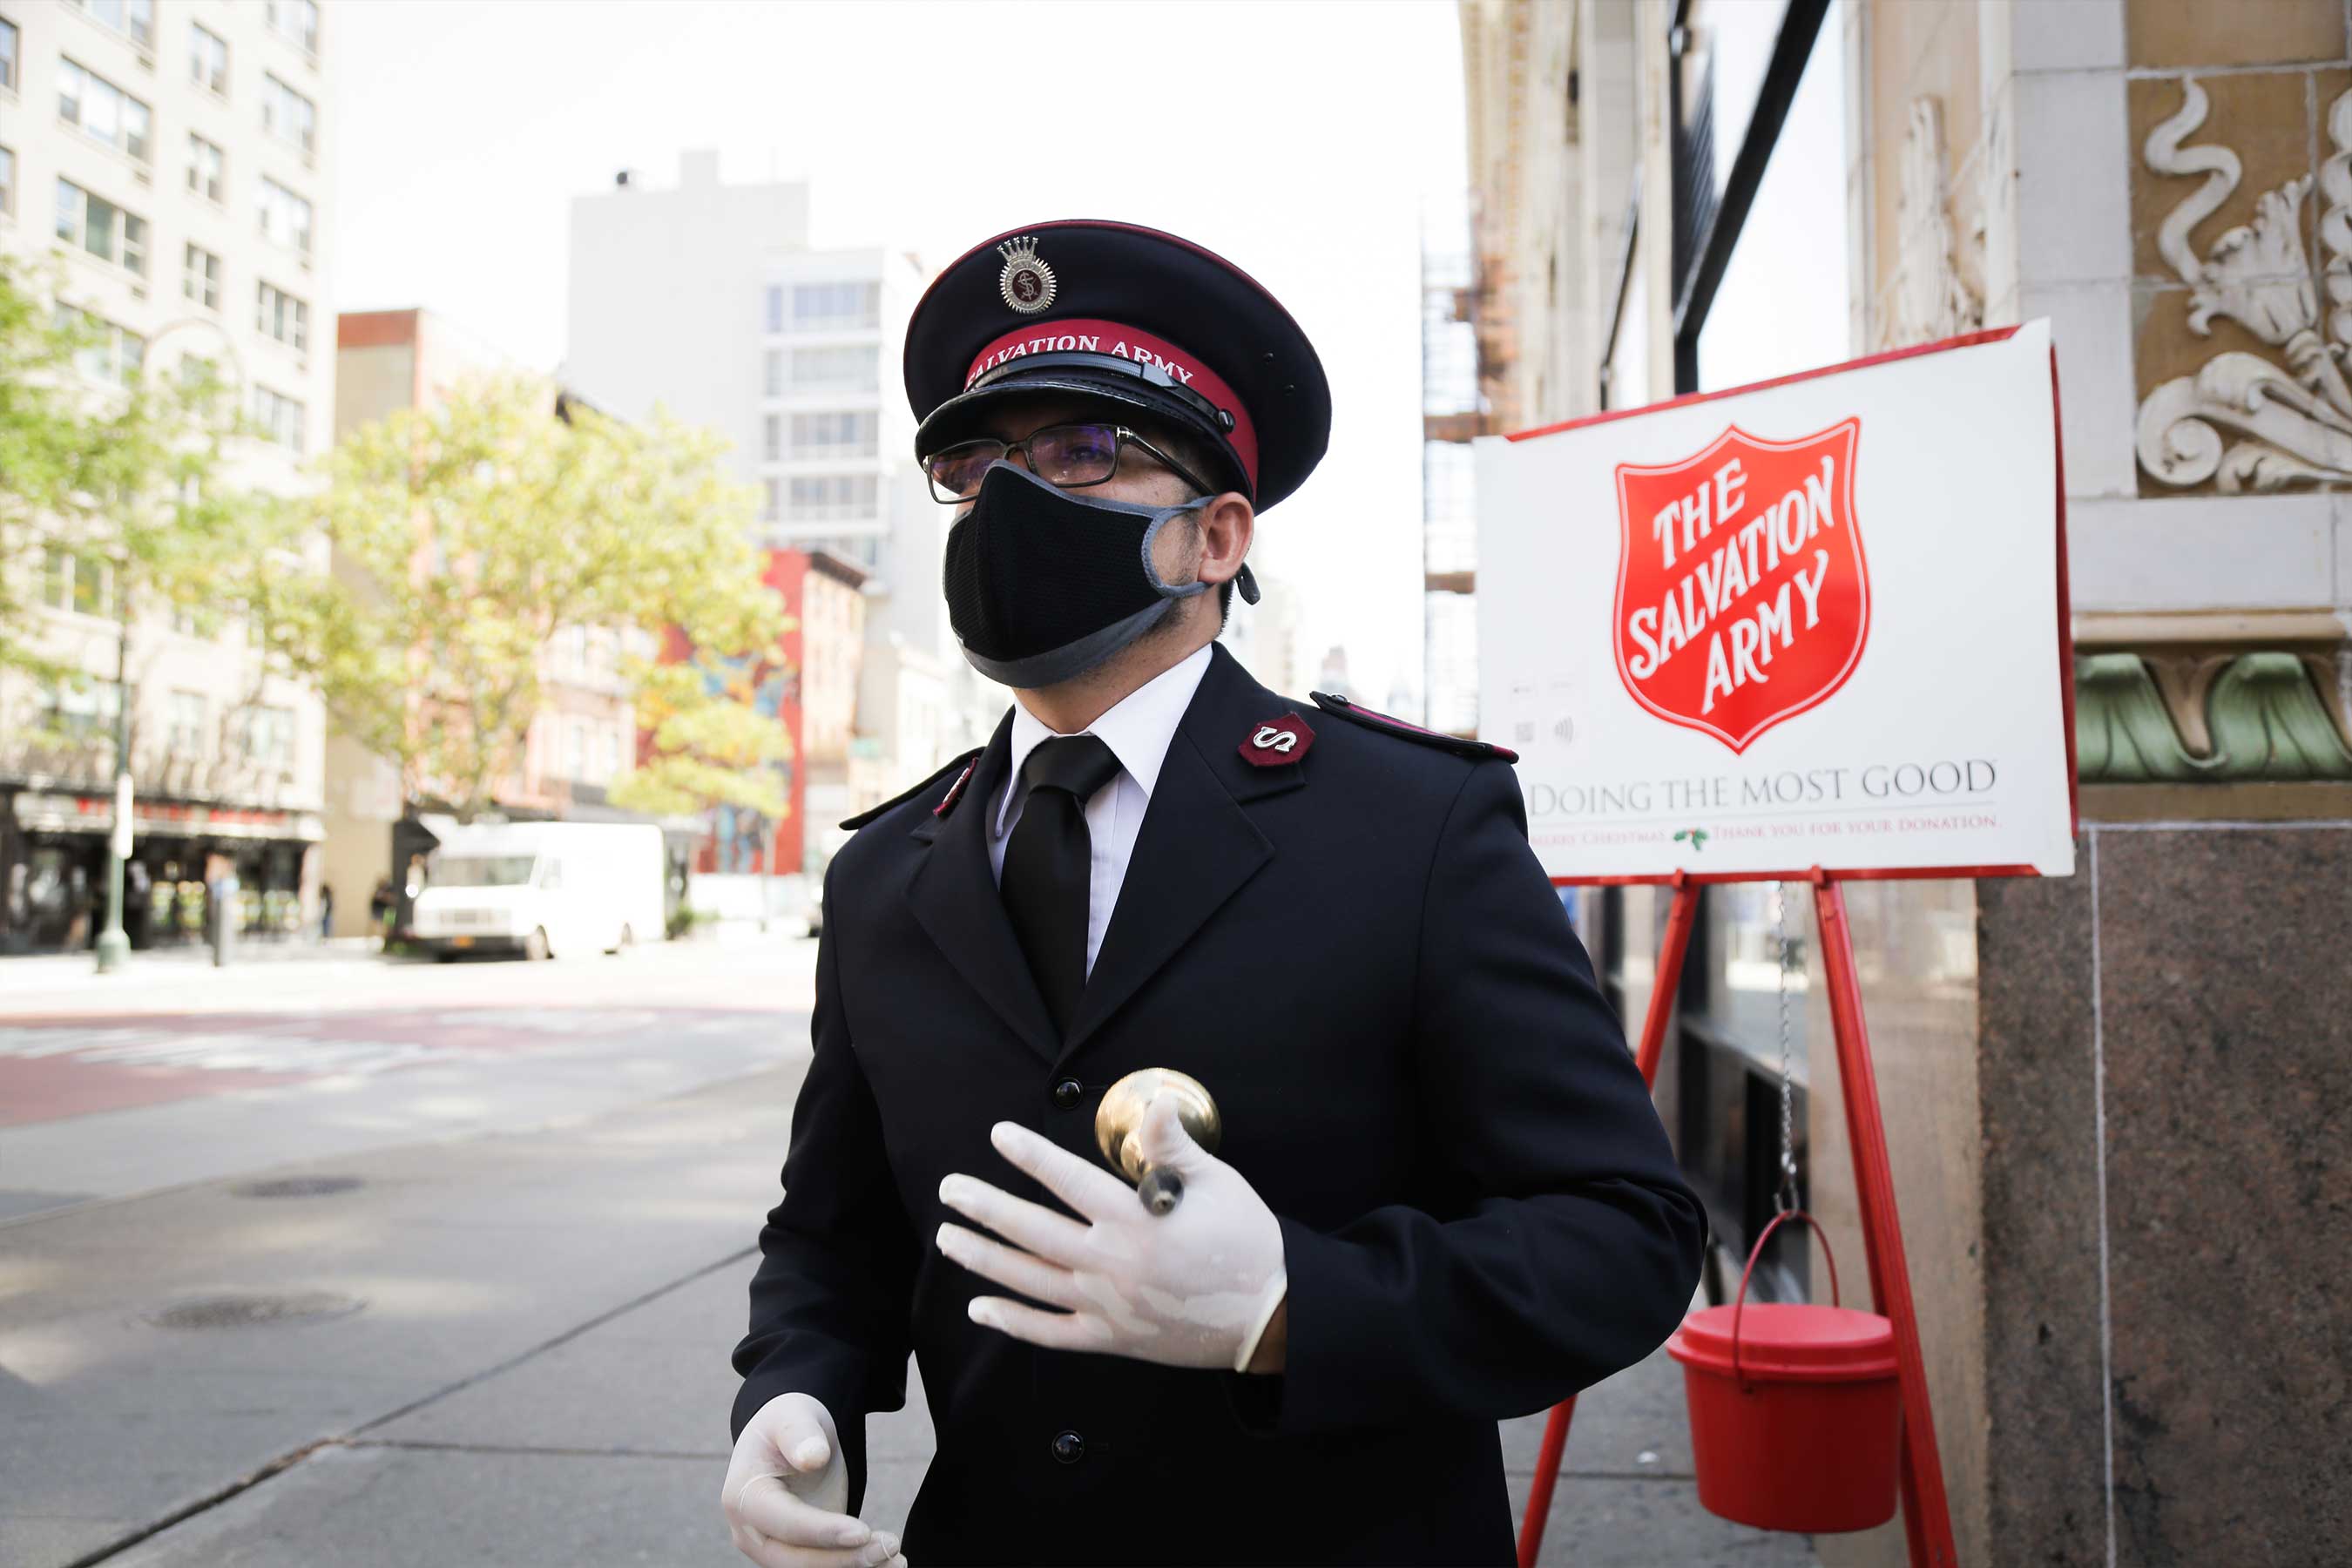 The Salvation Army USA Sets Out to 